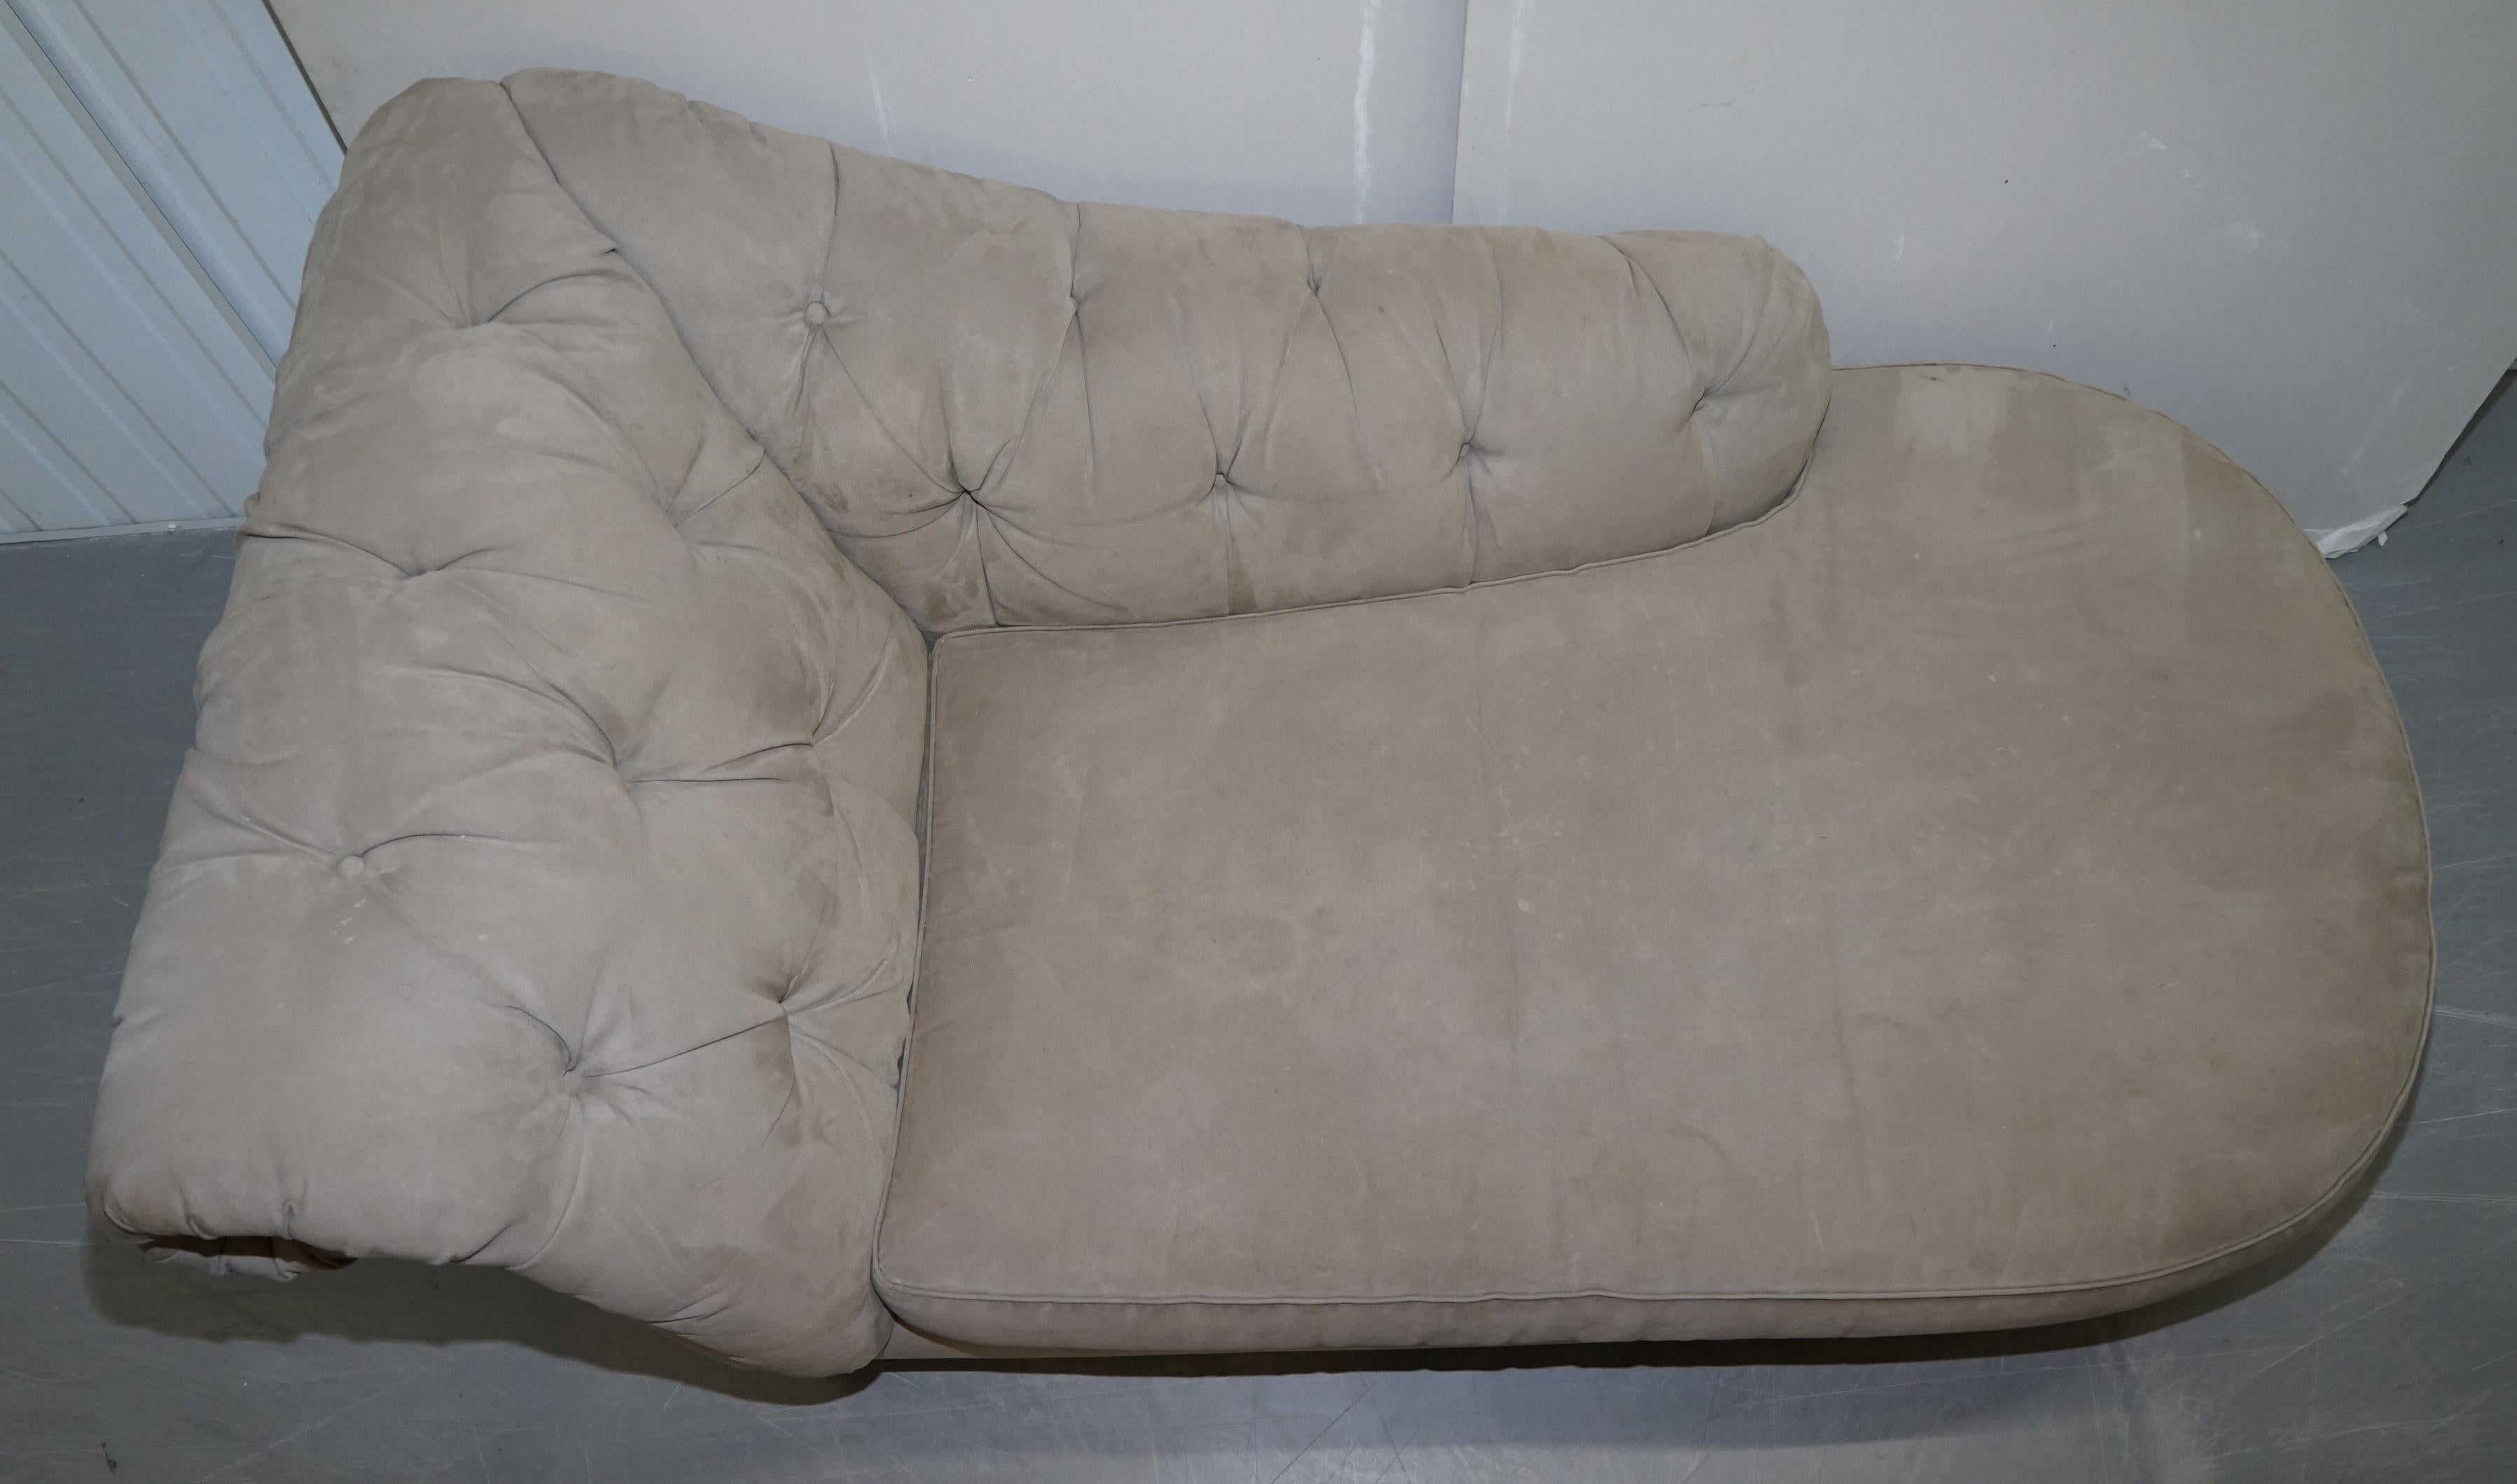 Hand-Crafted Luxury Natuzzi Italy Chesterfield Chaise Lounge with Velvet Upholstery